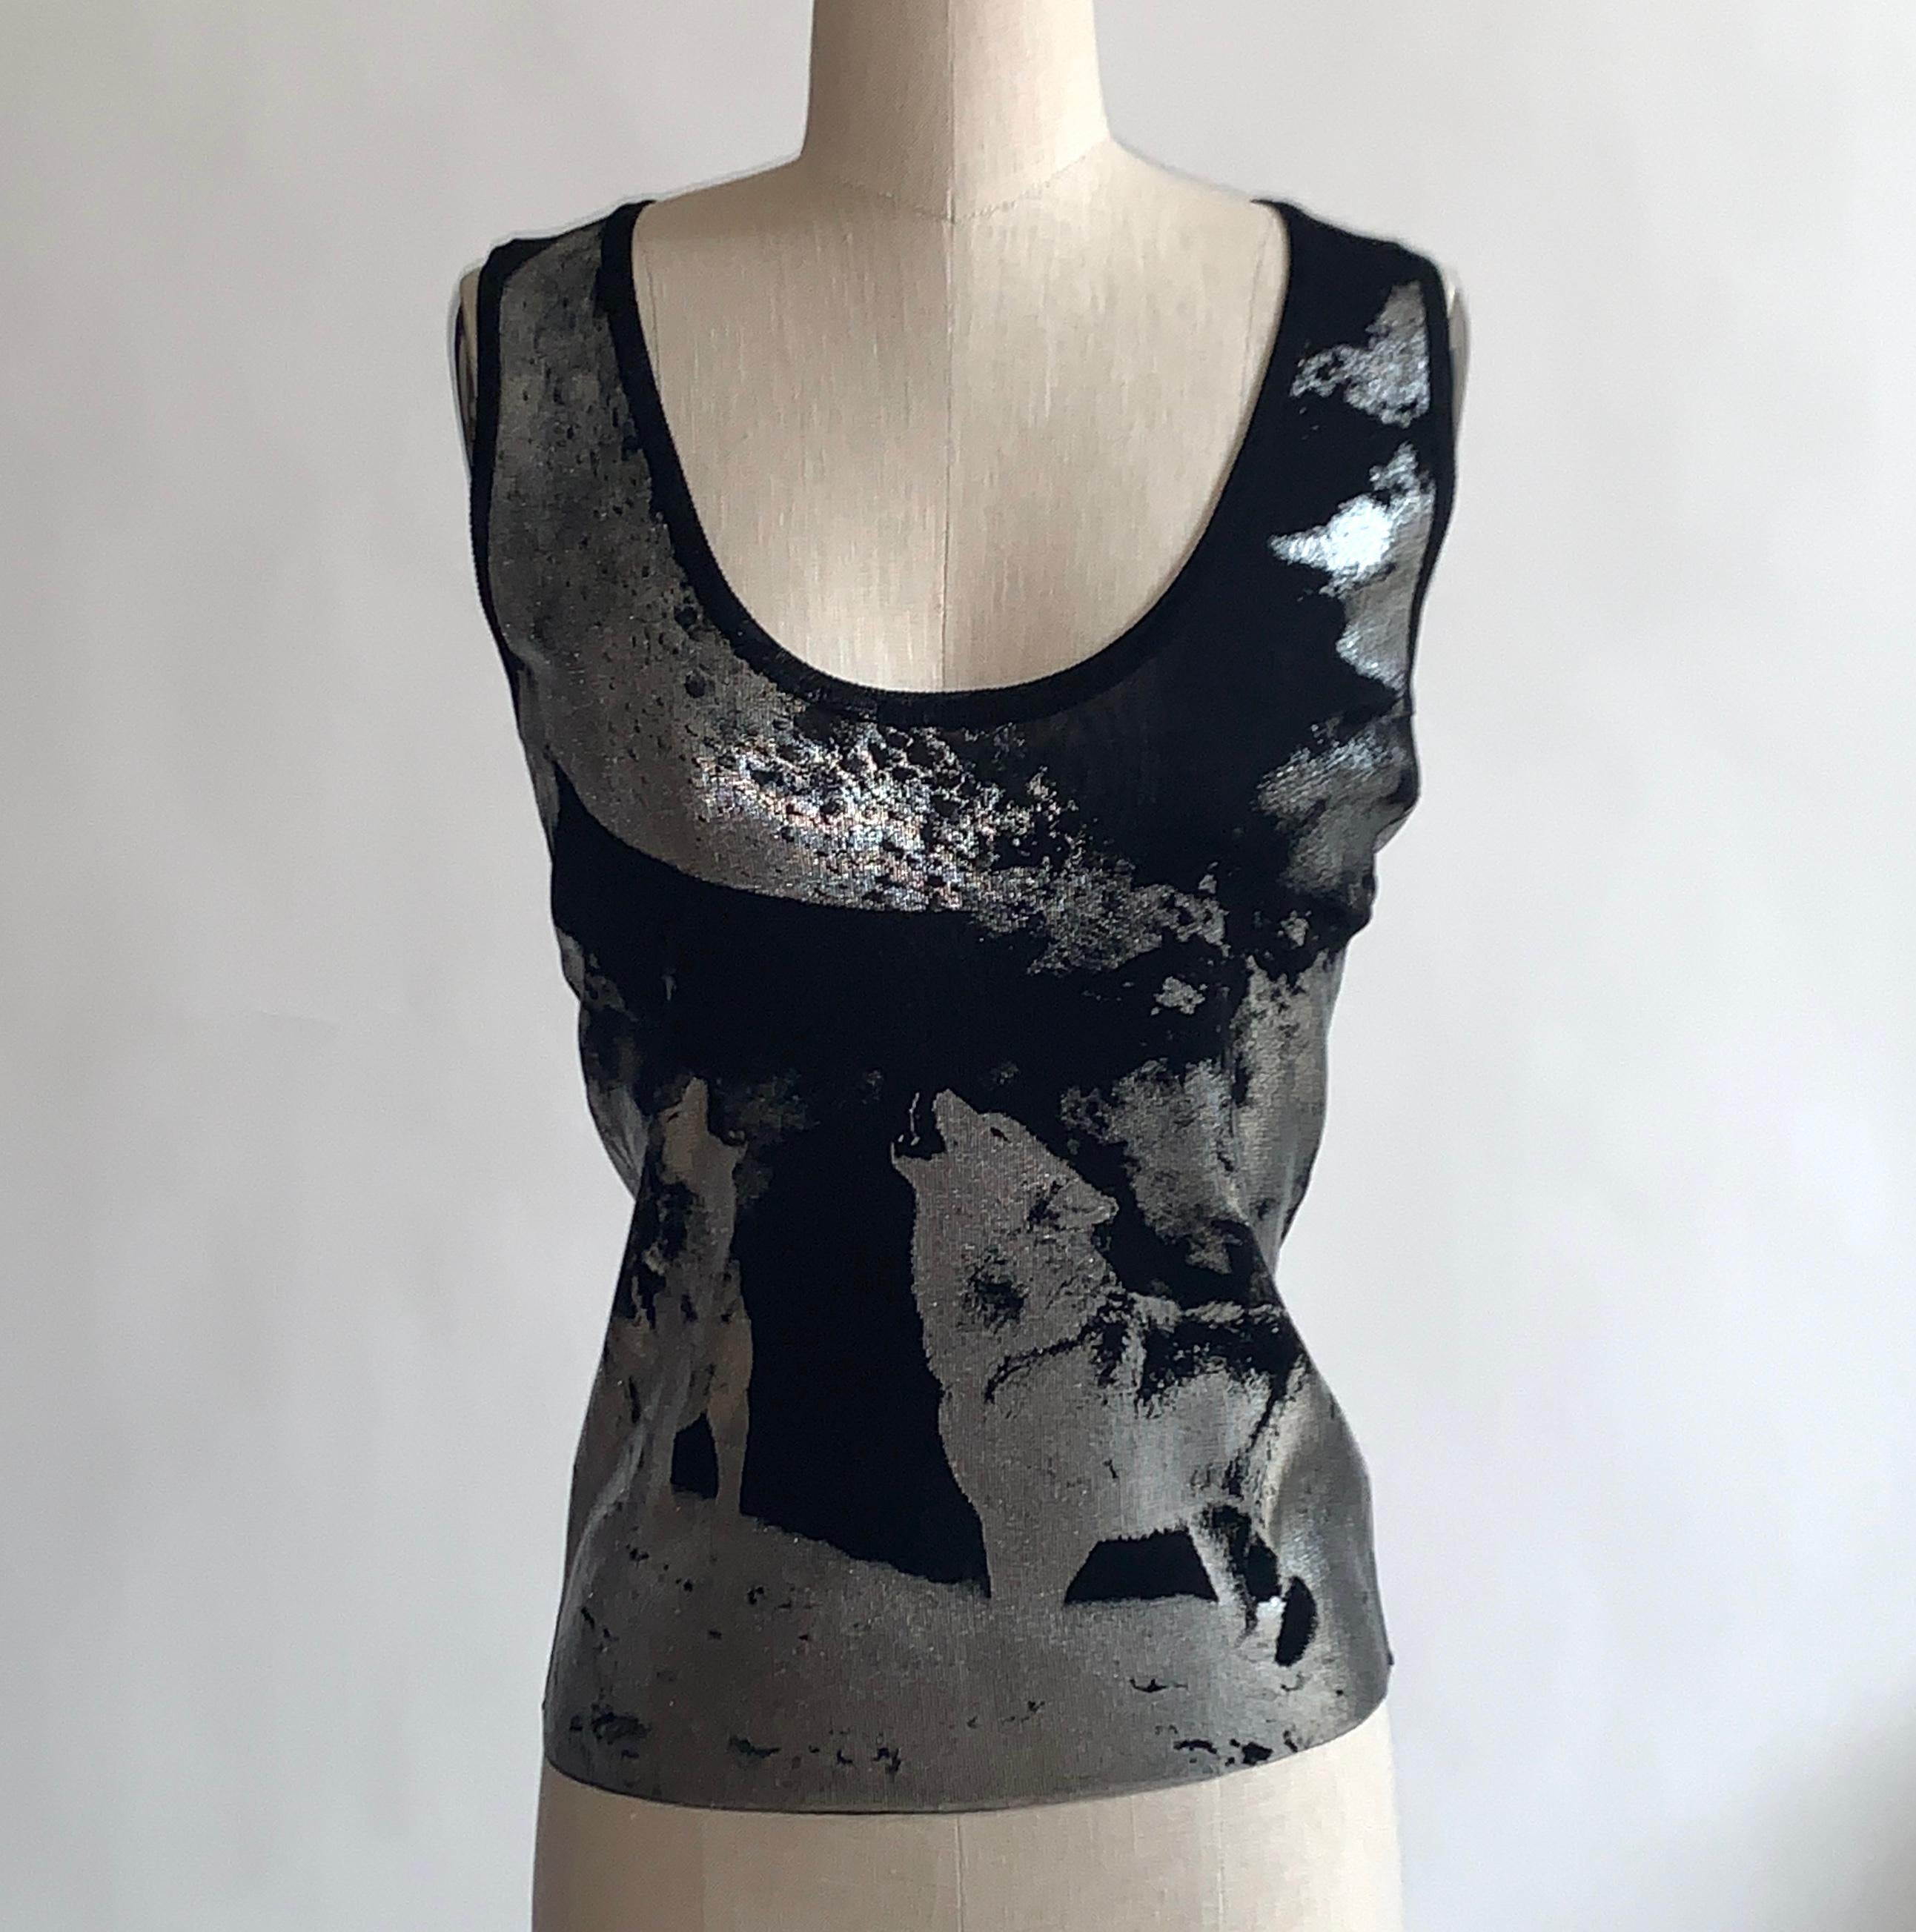 2000s Alexander Mcqueen fine sweater knit sleeveless top with silver howling wolf print throughout. Pull on, no closure. 

100% viscose rayon.

Made in Italy.

Labelled size S, see measurements.
Bust (underarm to underarm) 32